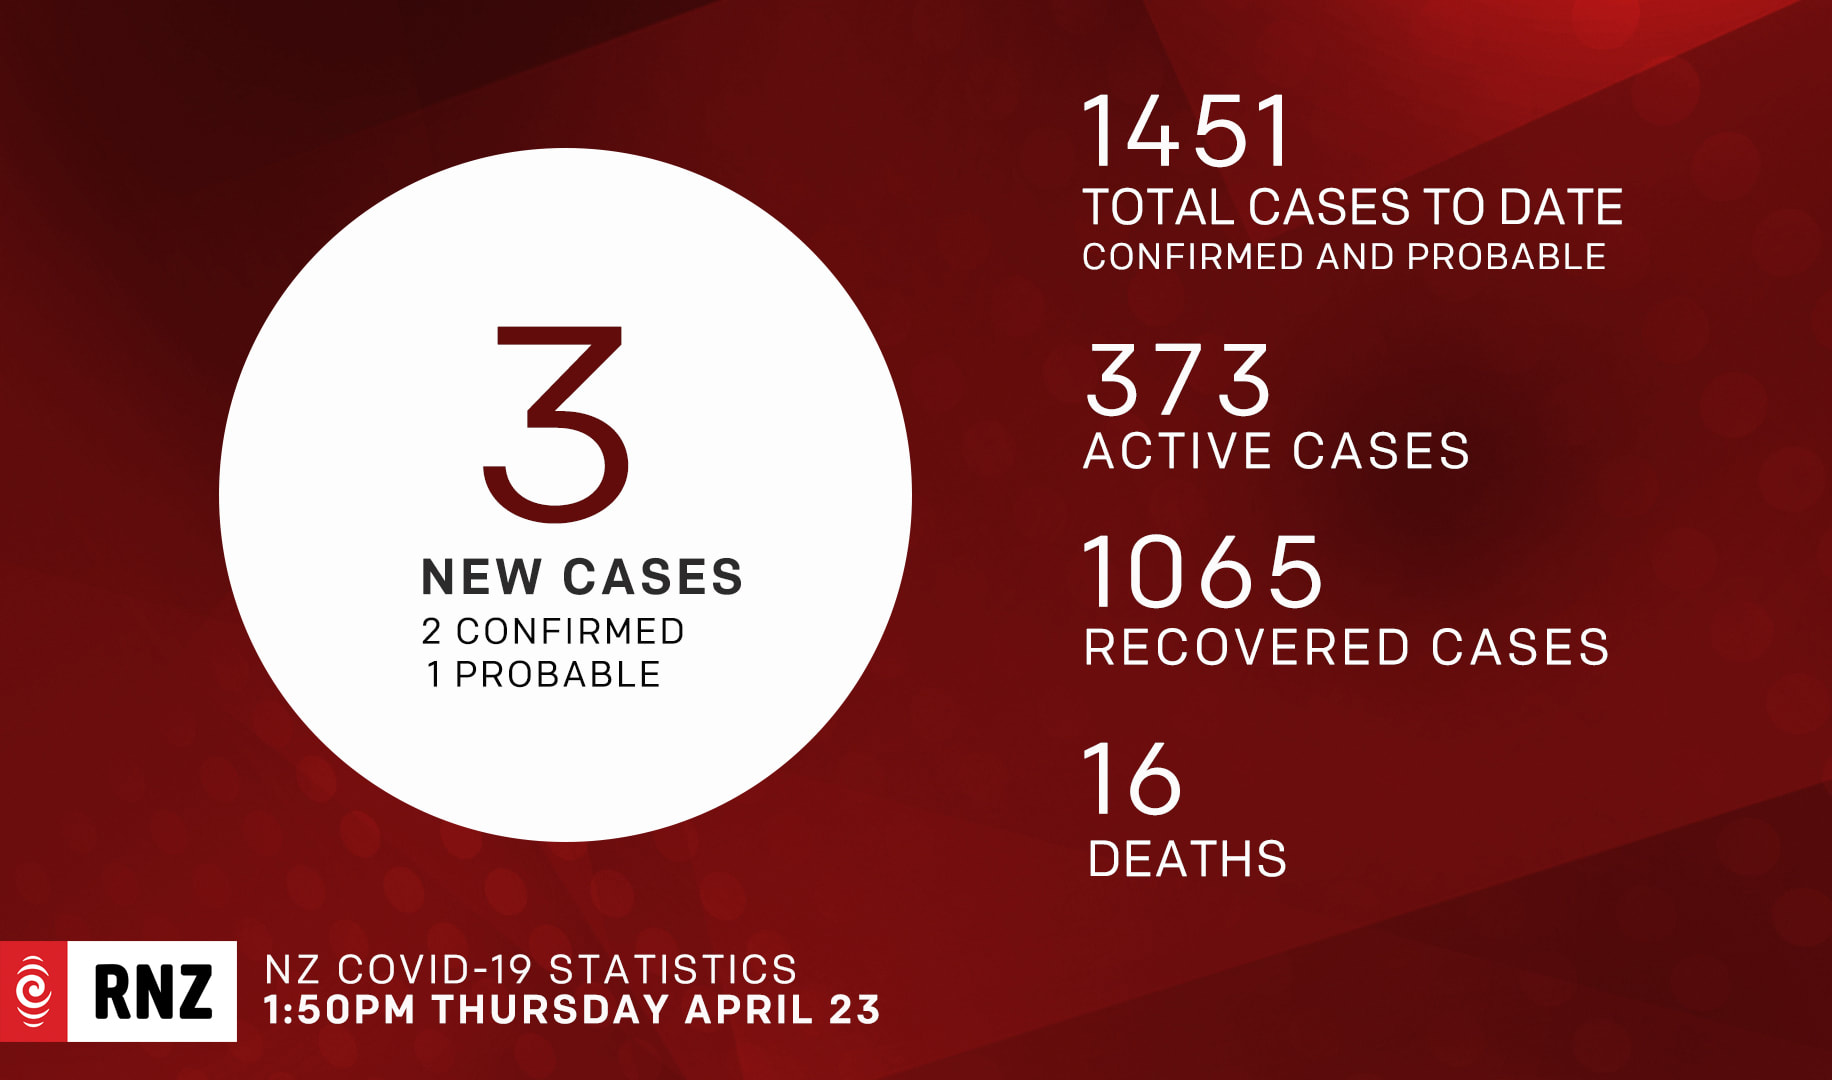 Covid-19 cases New Zealand NZ as on 23 April